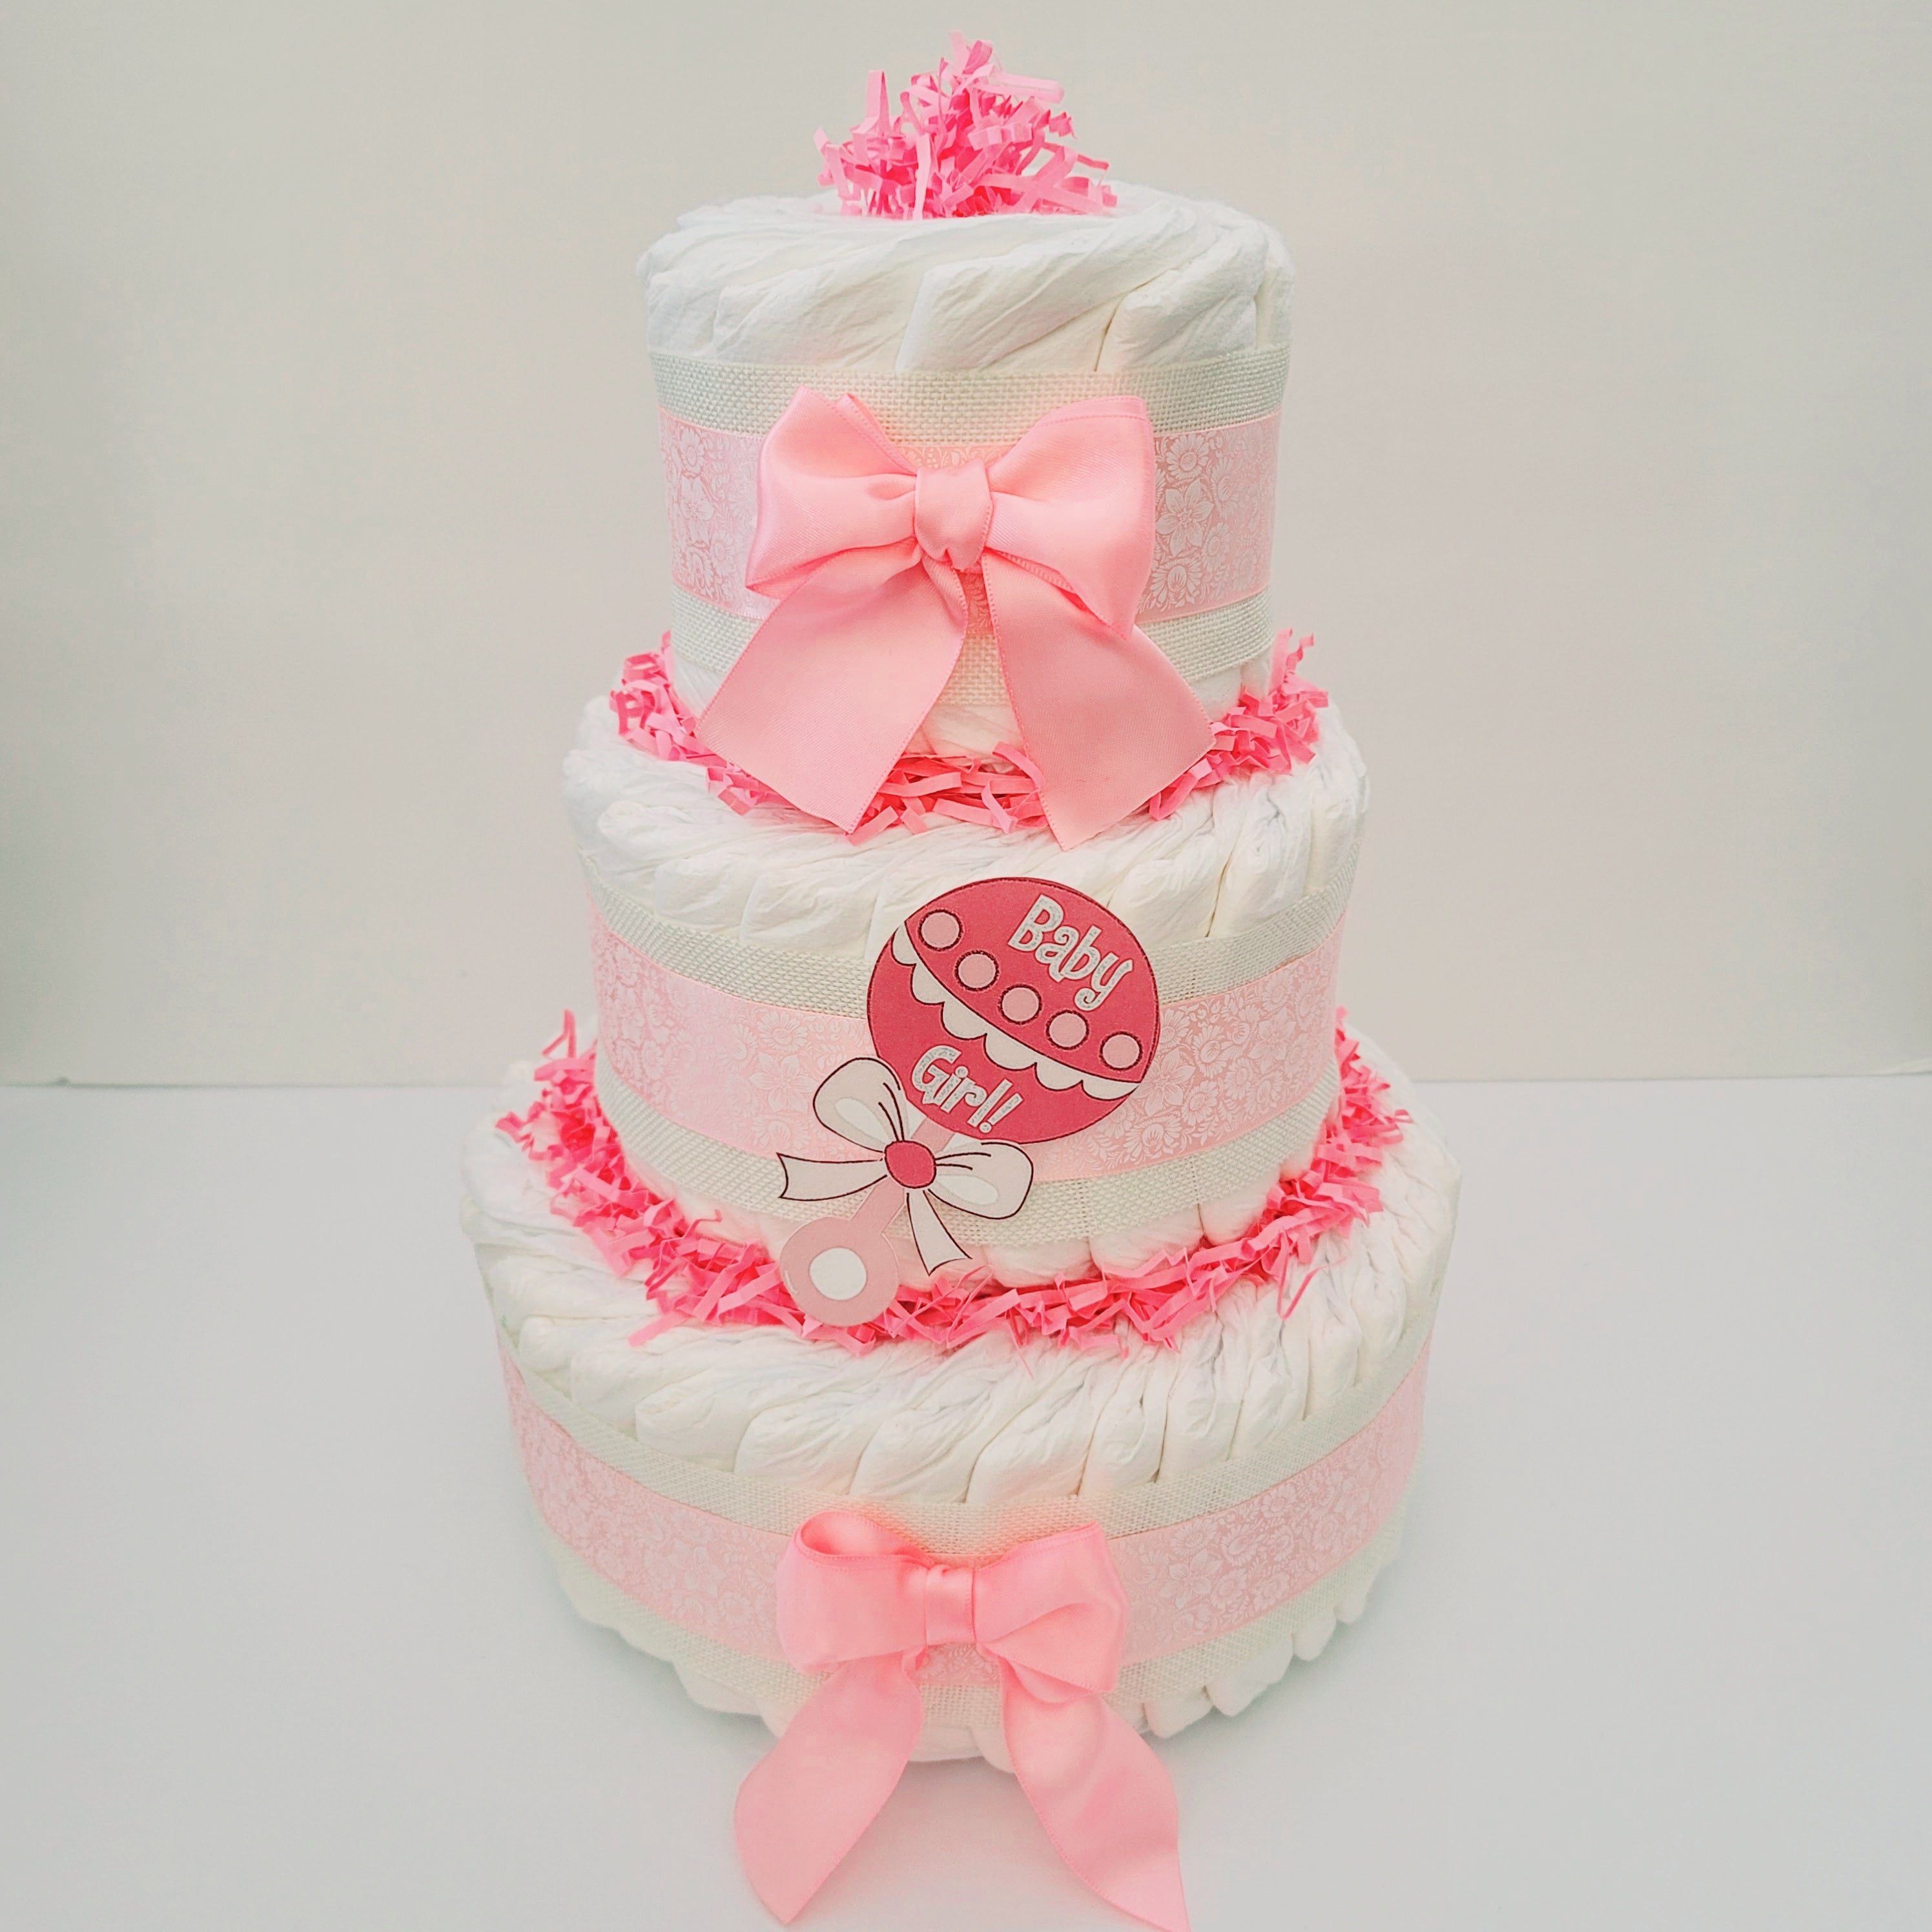 Sunshine-Diaper-Cakes Baby South Africa | Buy Sunshine-Diaper-Cakes Baby  Online | WantItAll